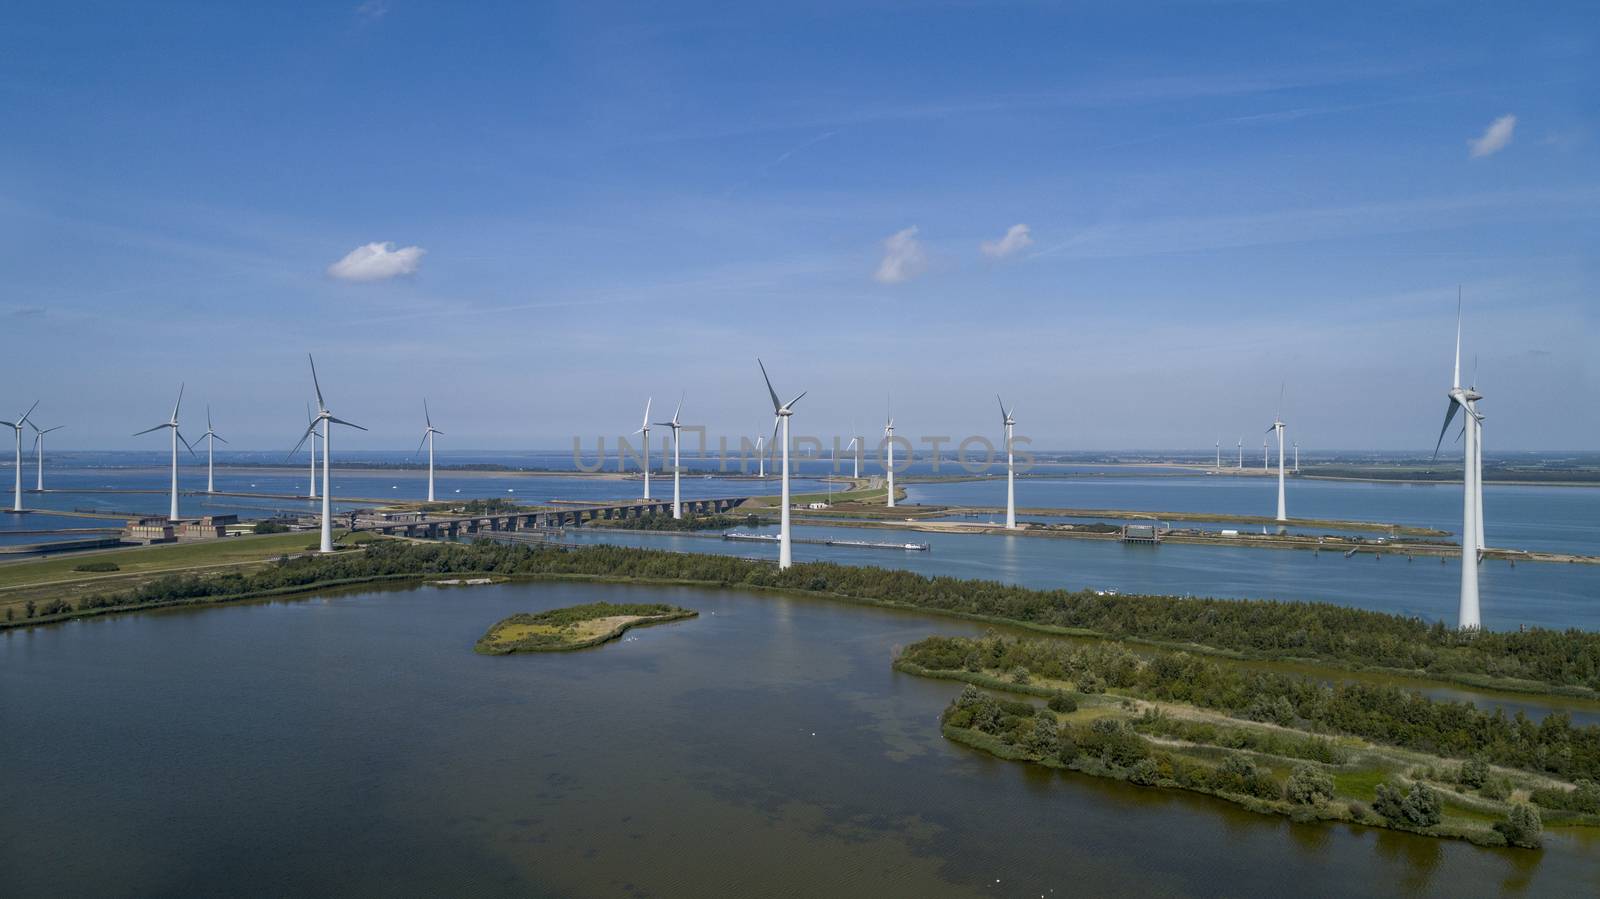 A Modern Wind Farm consisting of Wind Turbines with Two and Three Blades along the Shore of Grevelingenmeer under a Blue Sky in the Netherlands